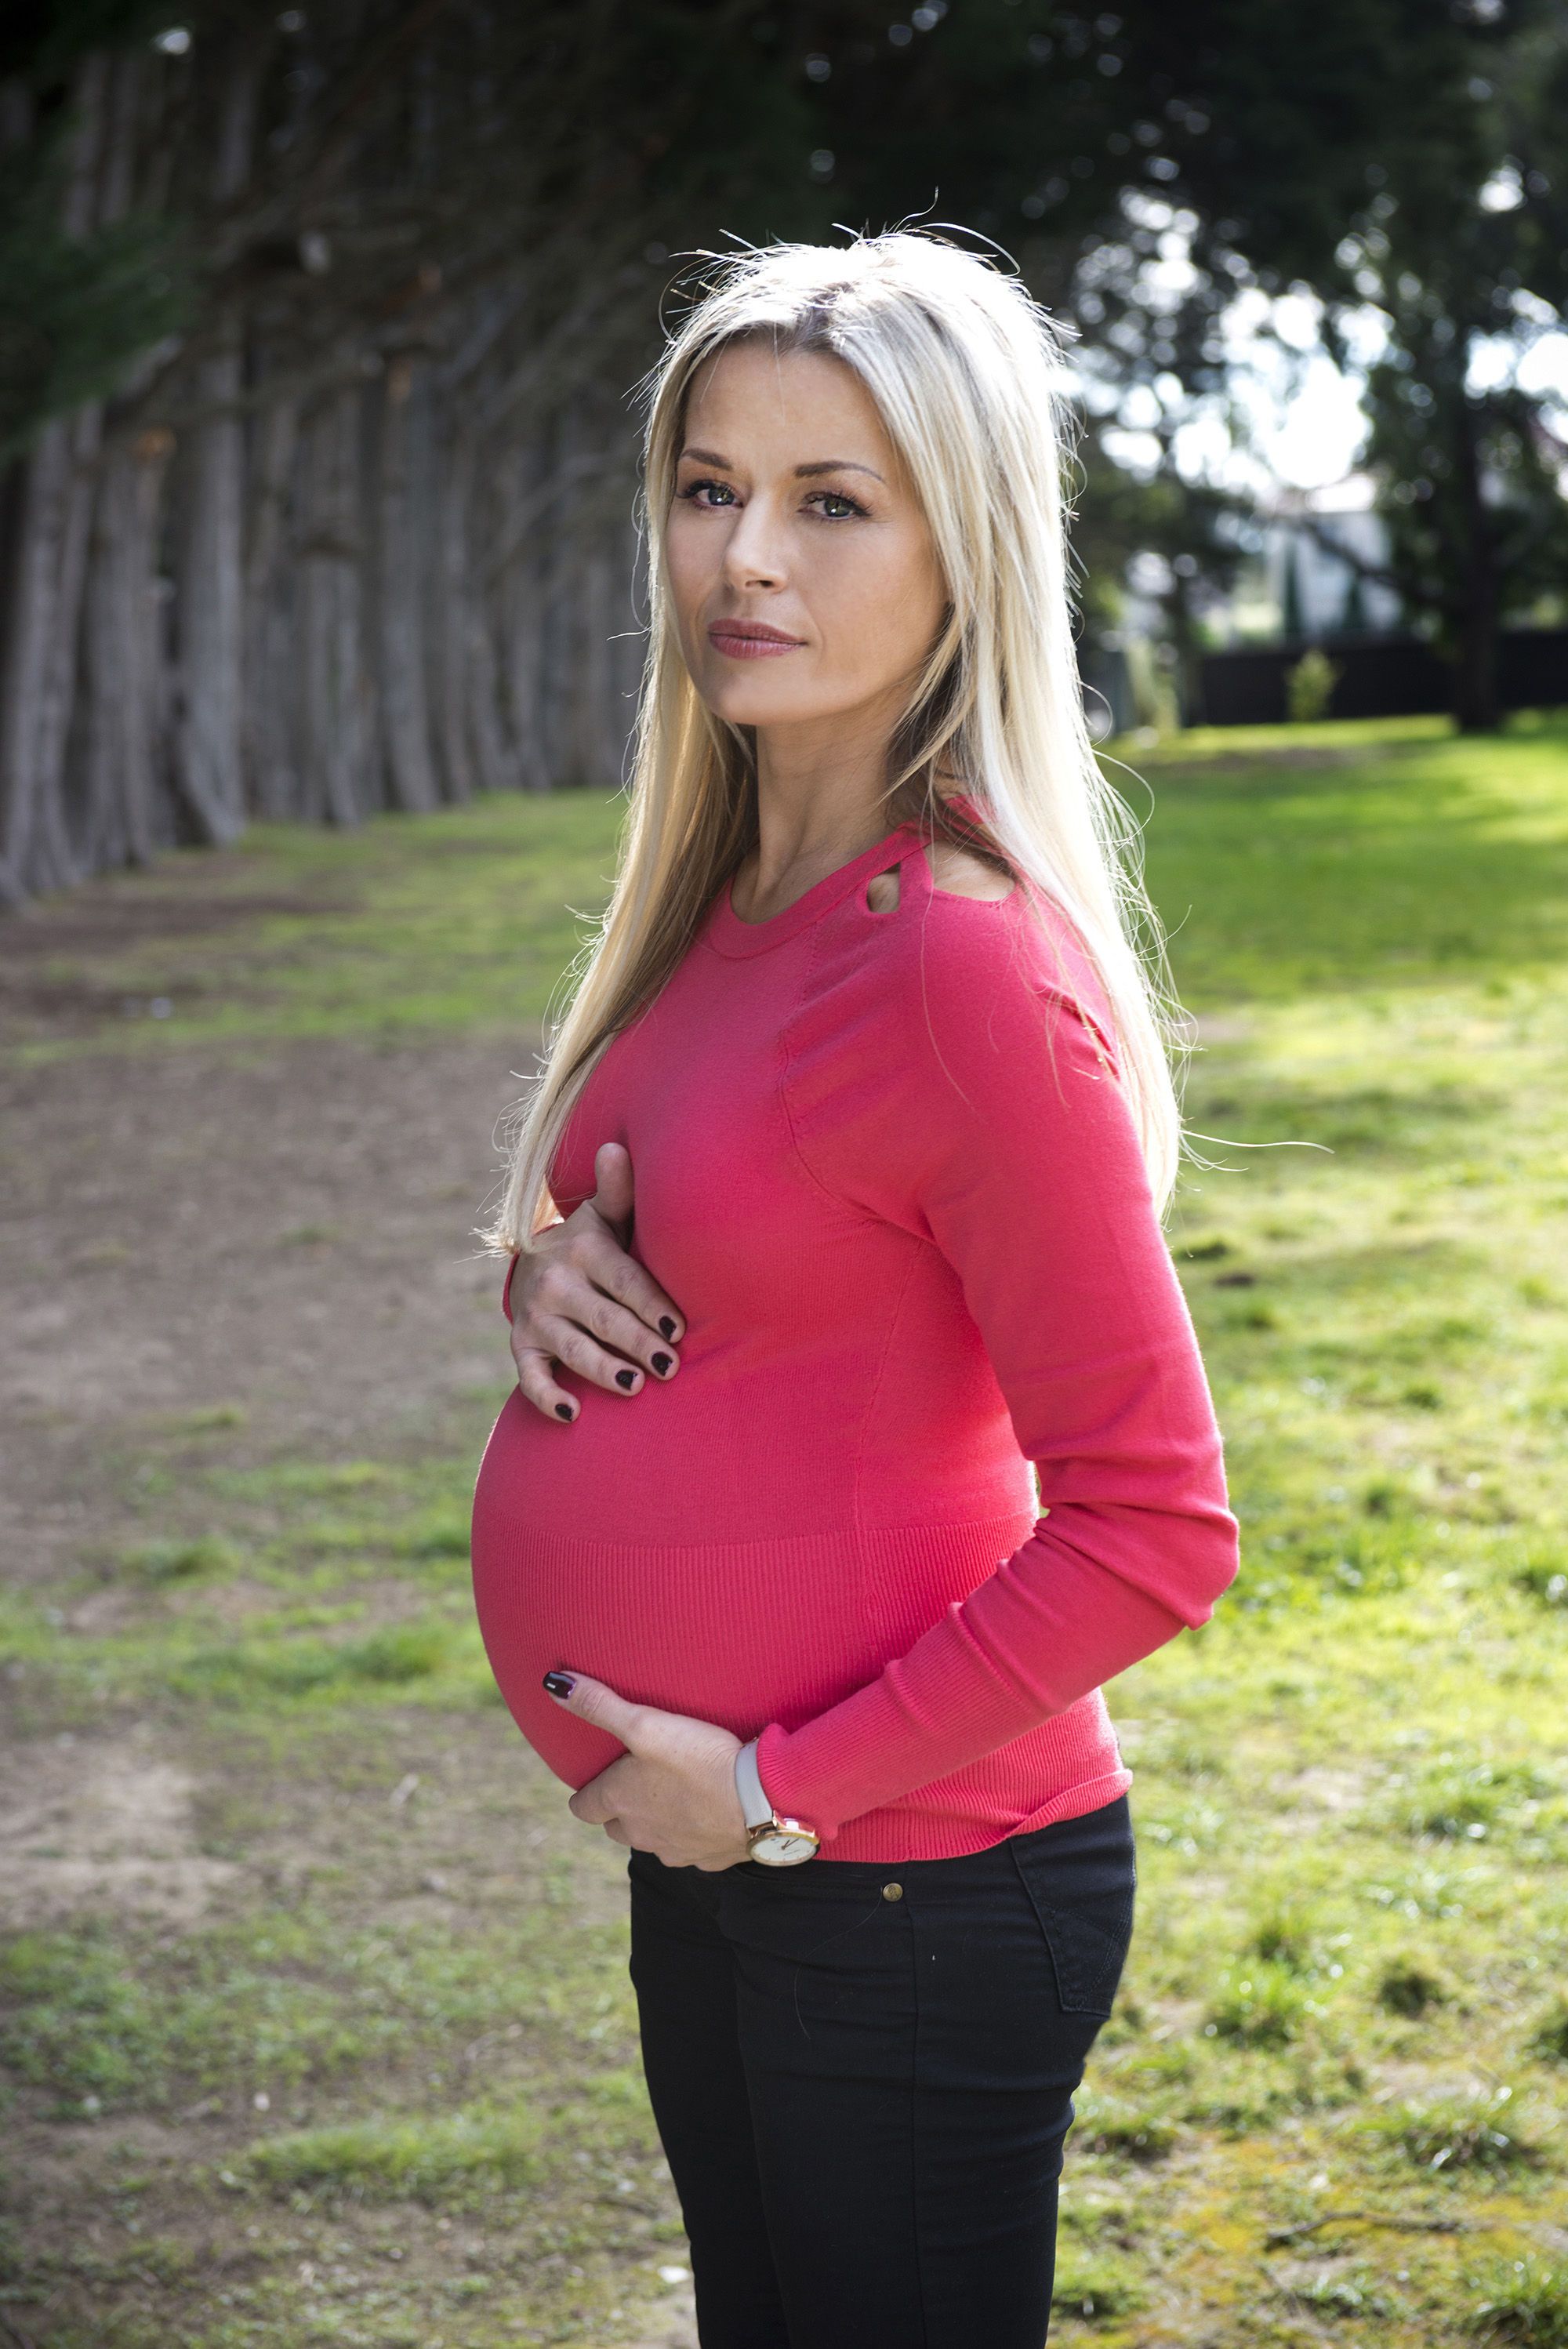 Neighbours star Madeleine West reflects on the shock bus accident that killed her